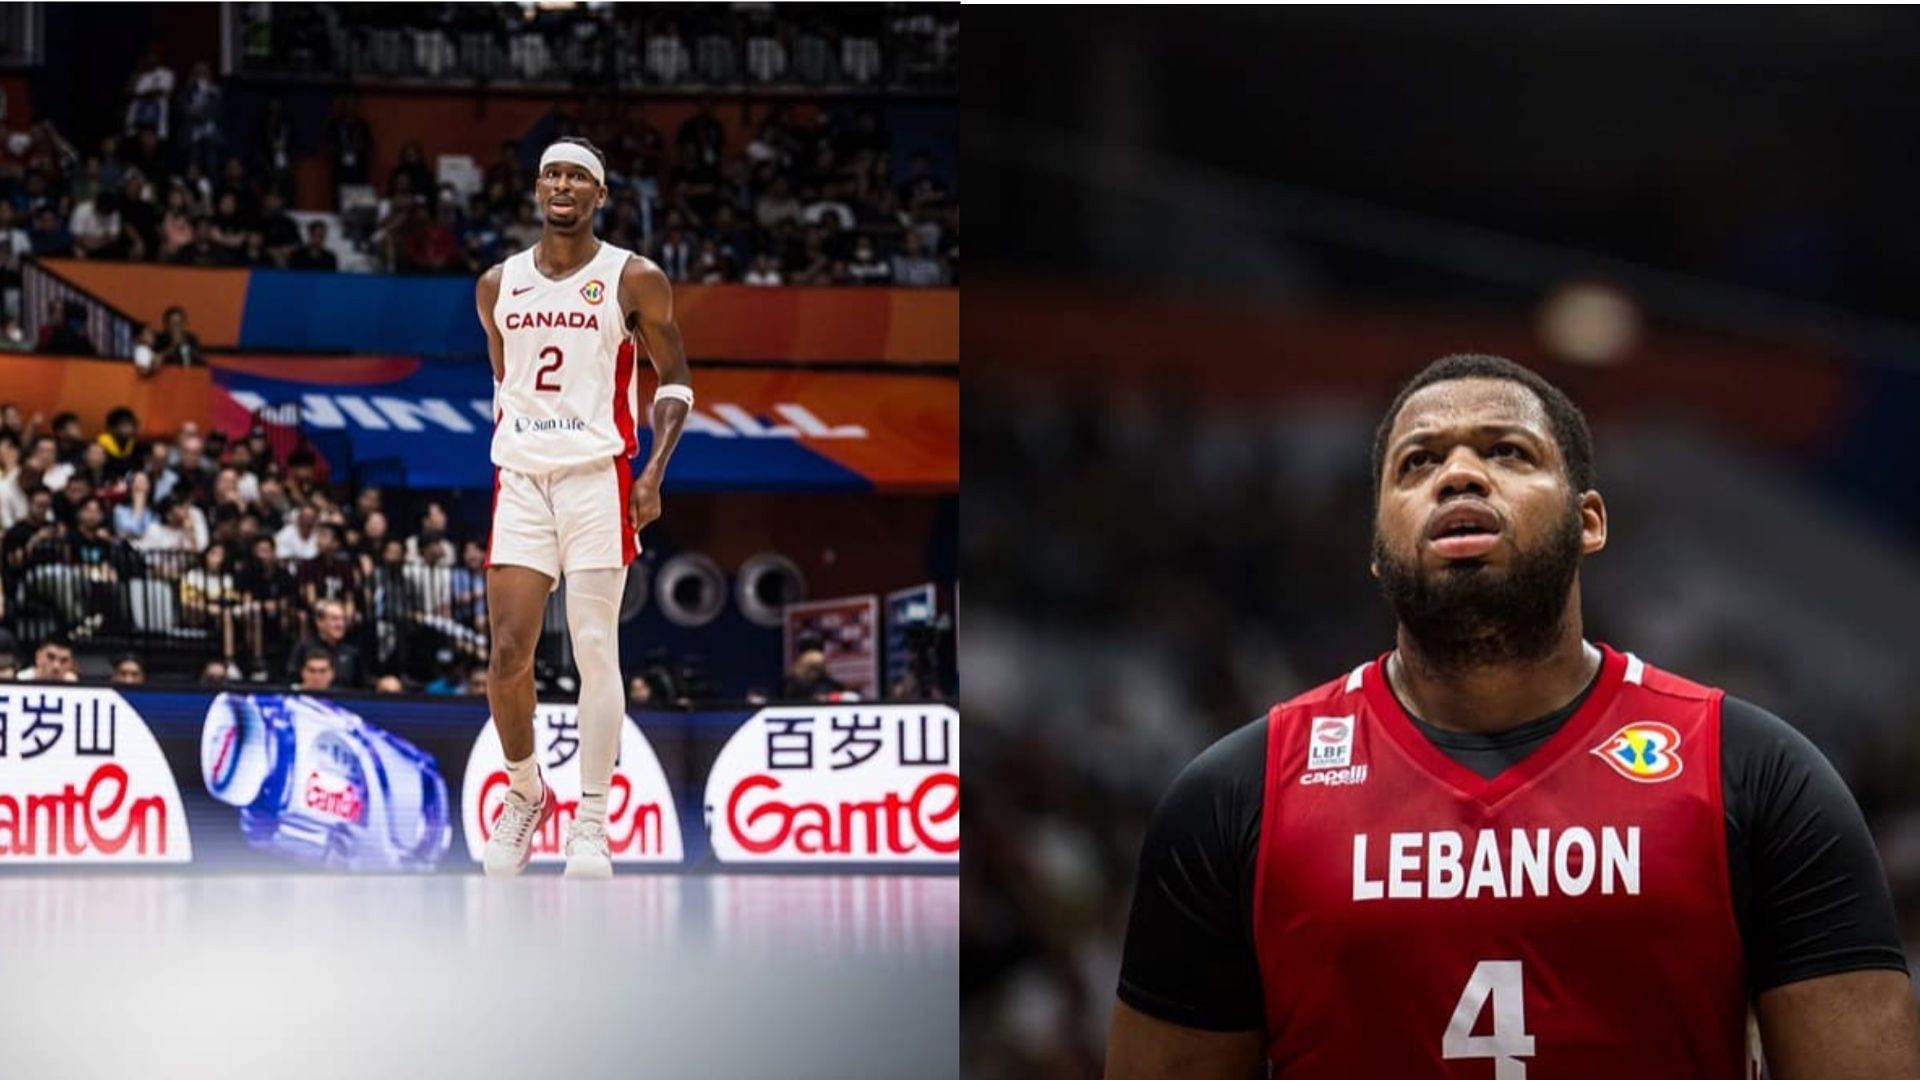 Lebanon vs Canada FIBA World Cup 2023 Date, time, where to watch, live stream details, and more